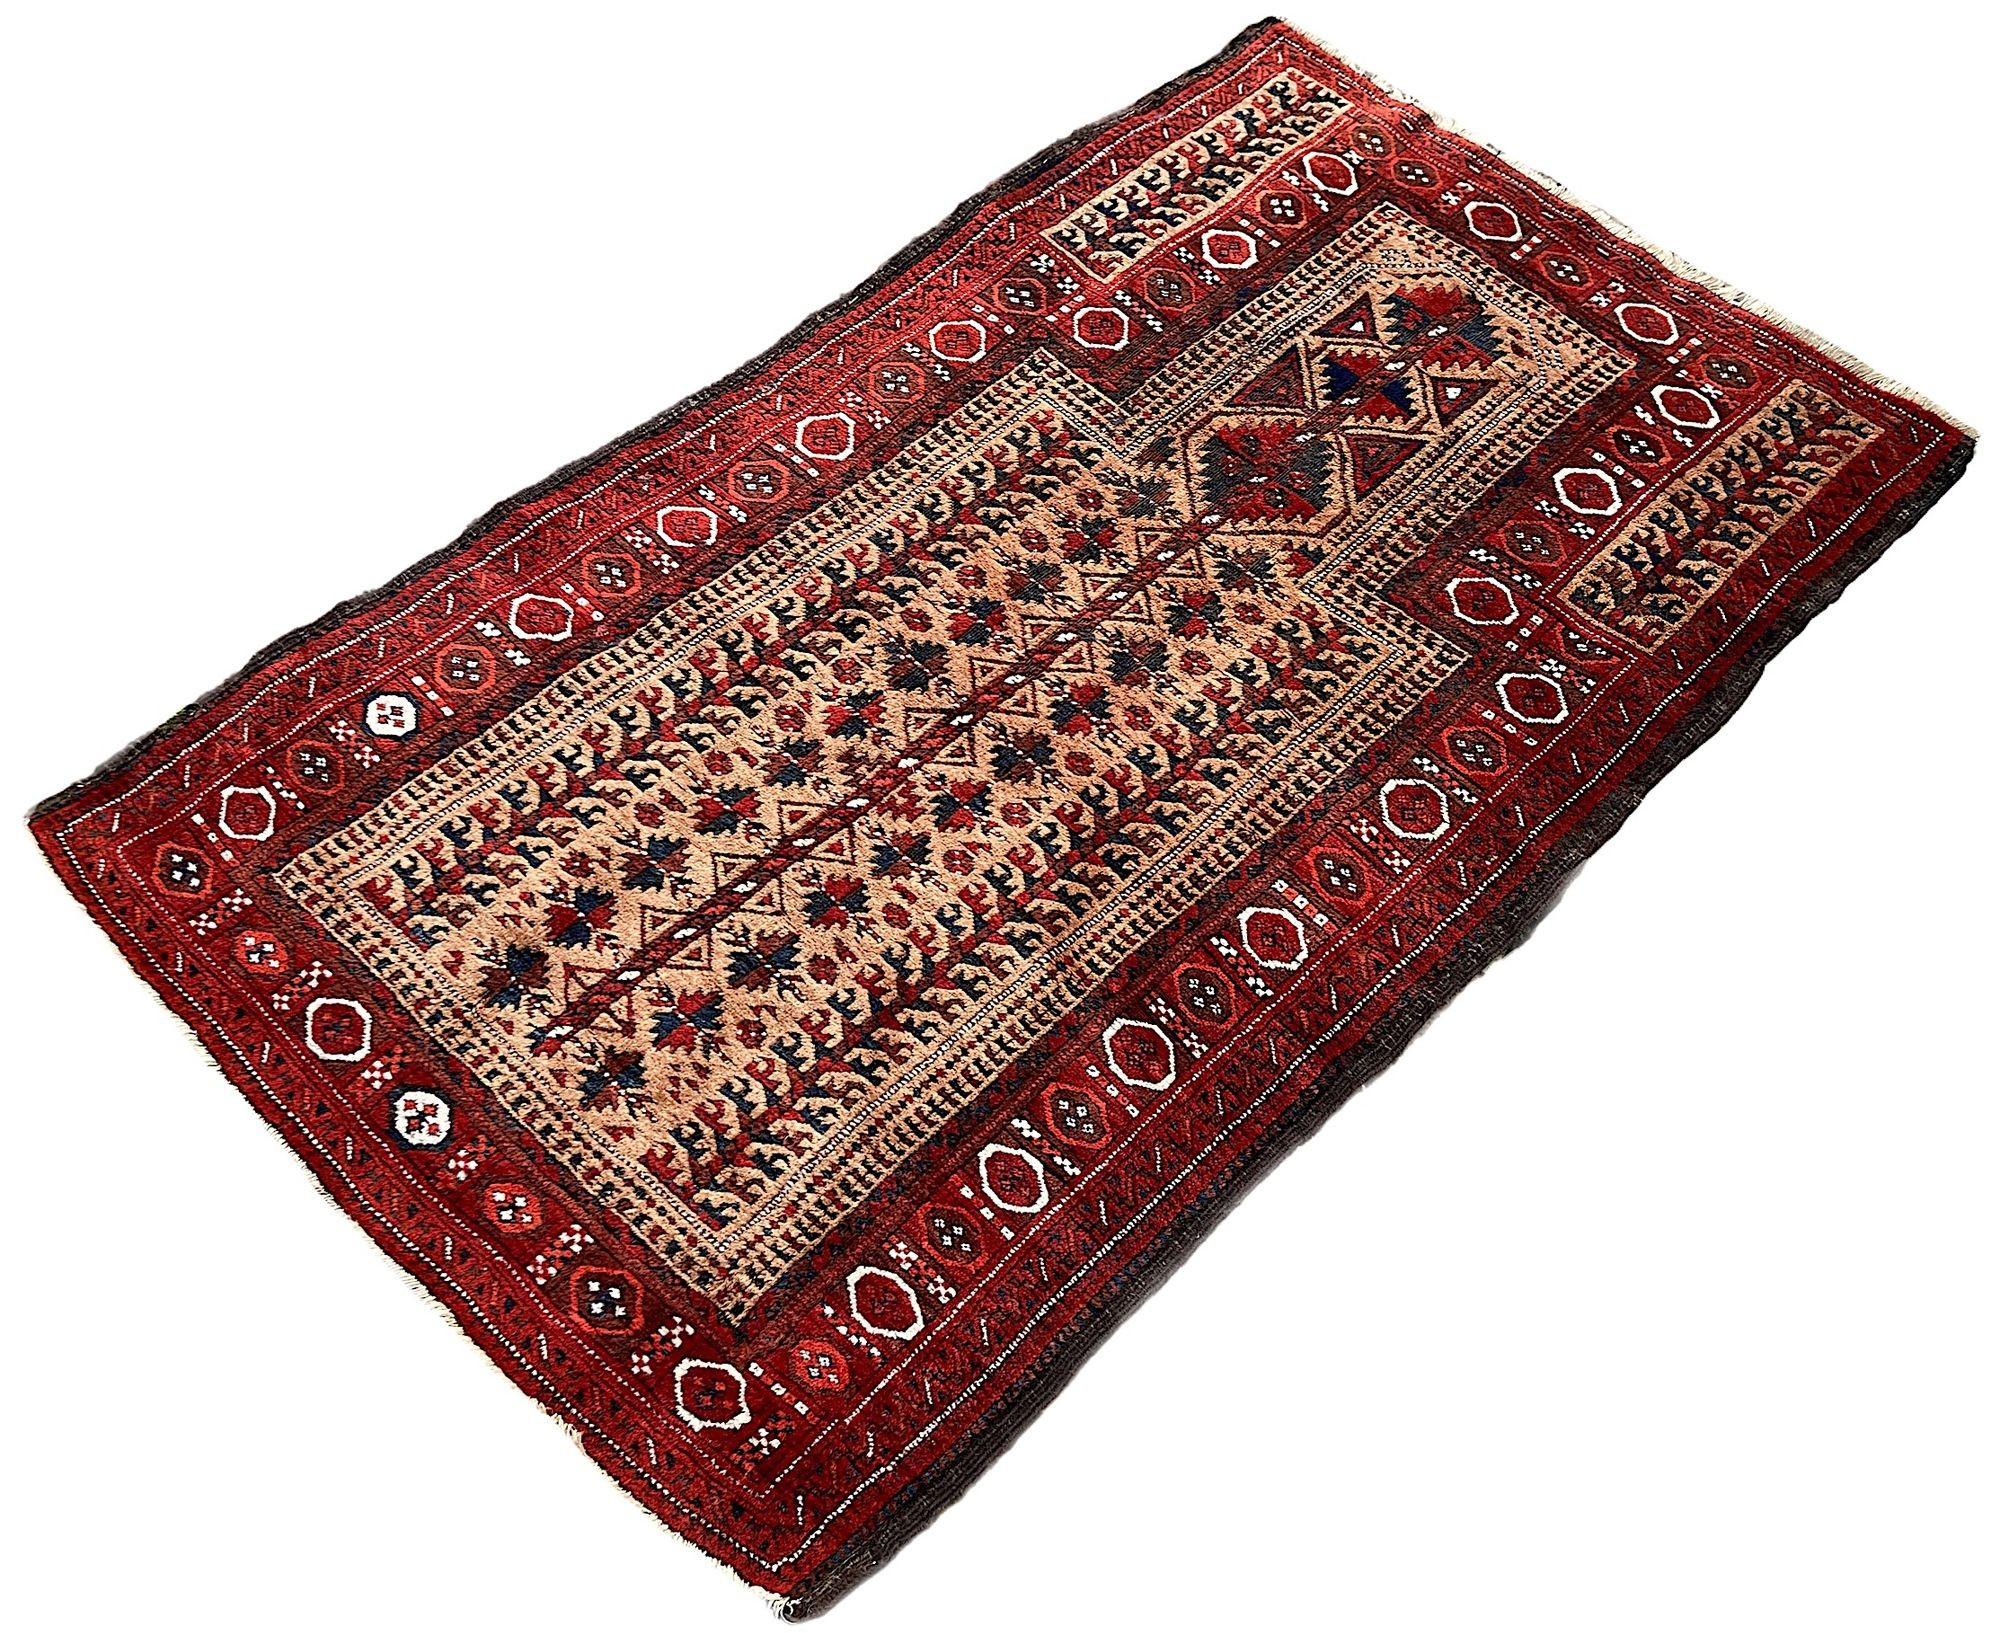 Antique Belouch Rug 1.76m x 0.89m In Good Condition For Sale In St. Albans, GB